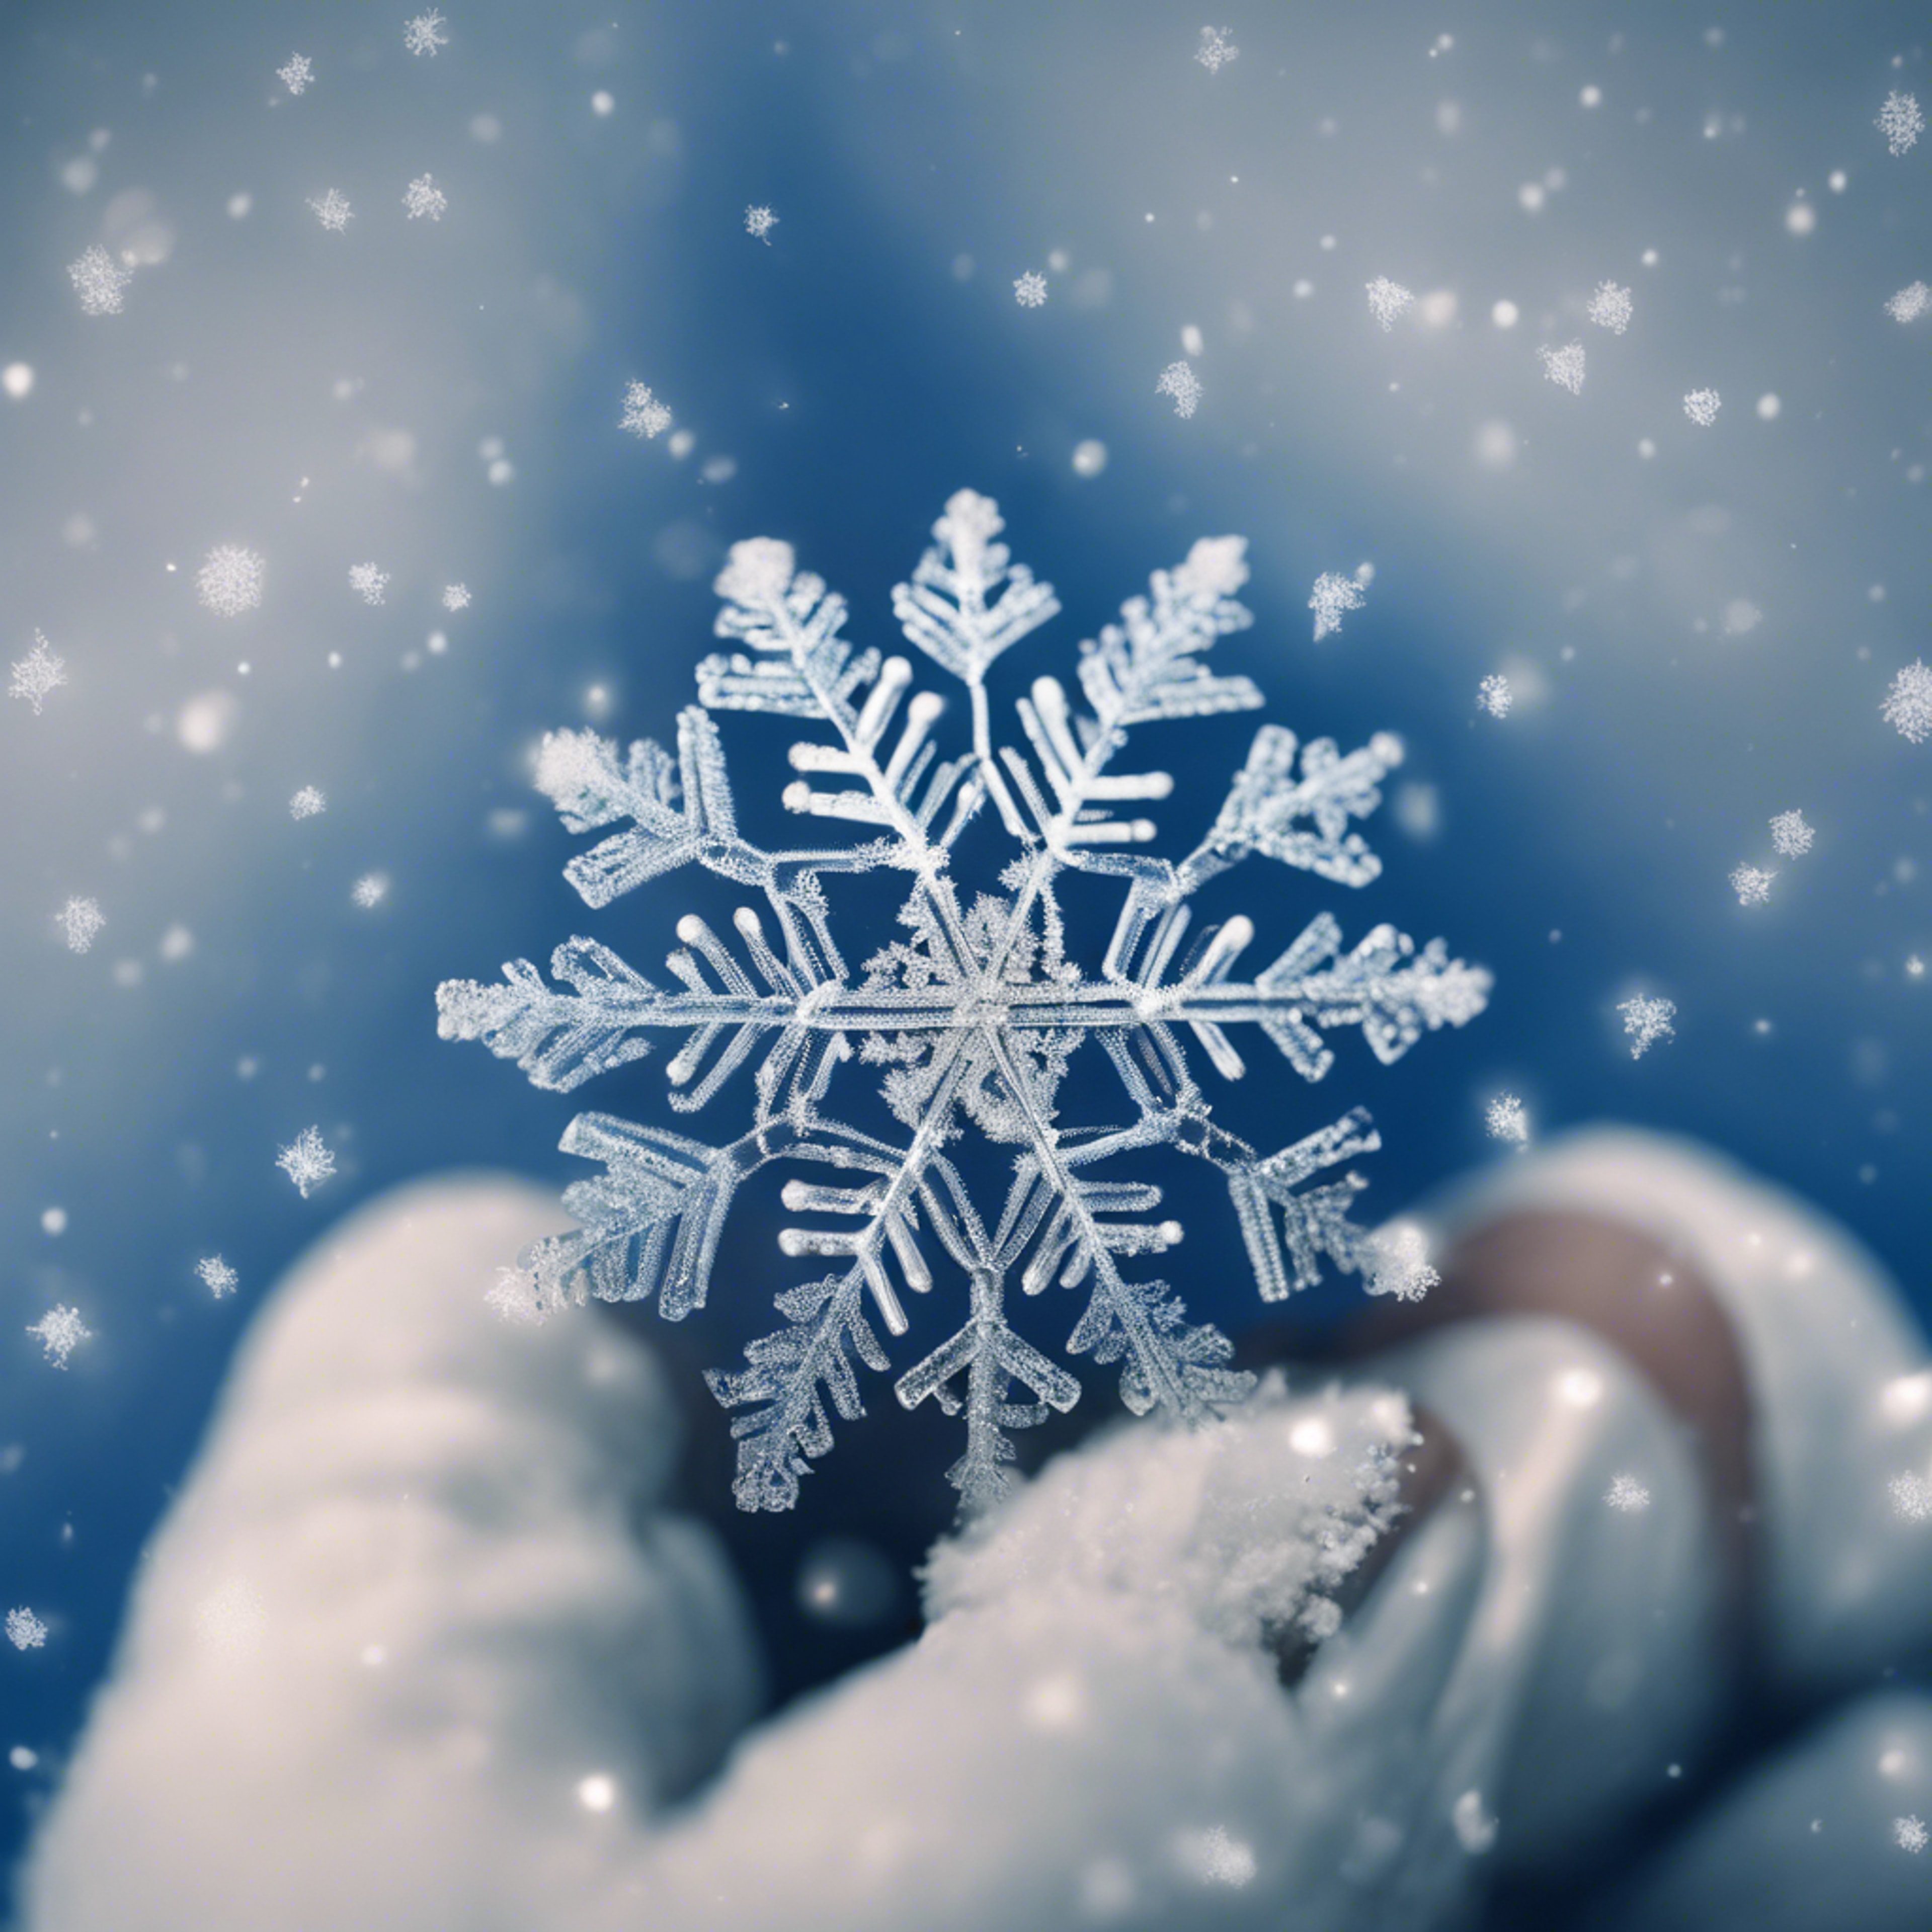 Intricate patterns of a snowflake on a blue gloved finger. Tapet[6c7ed0f3c74b413e9833]